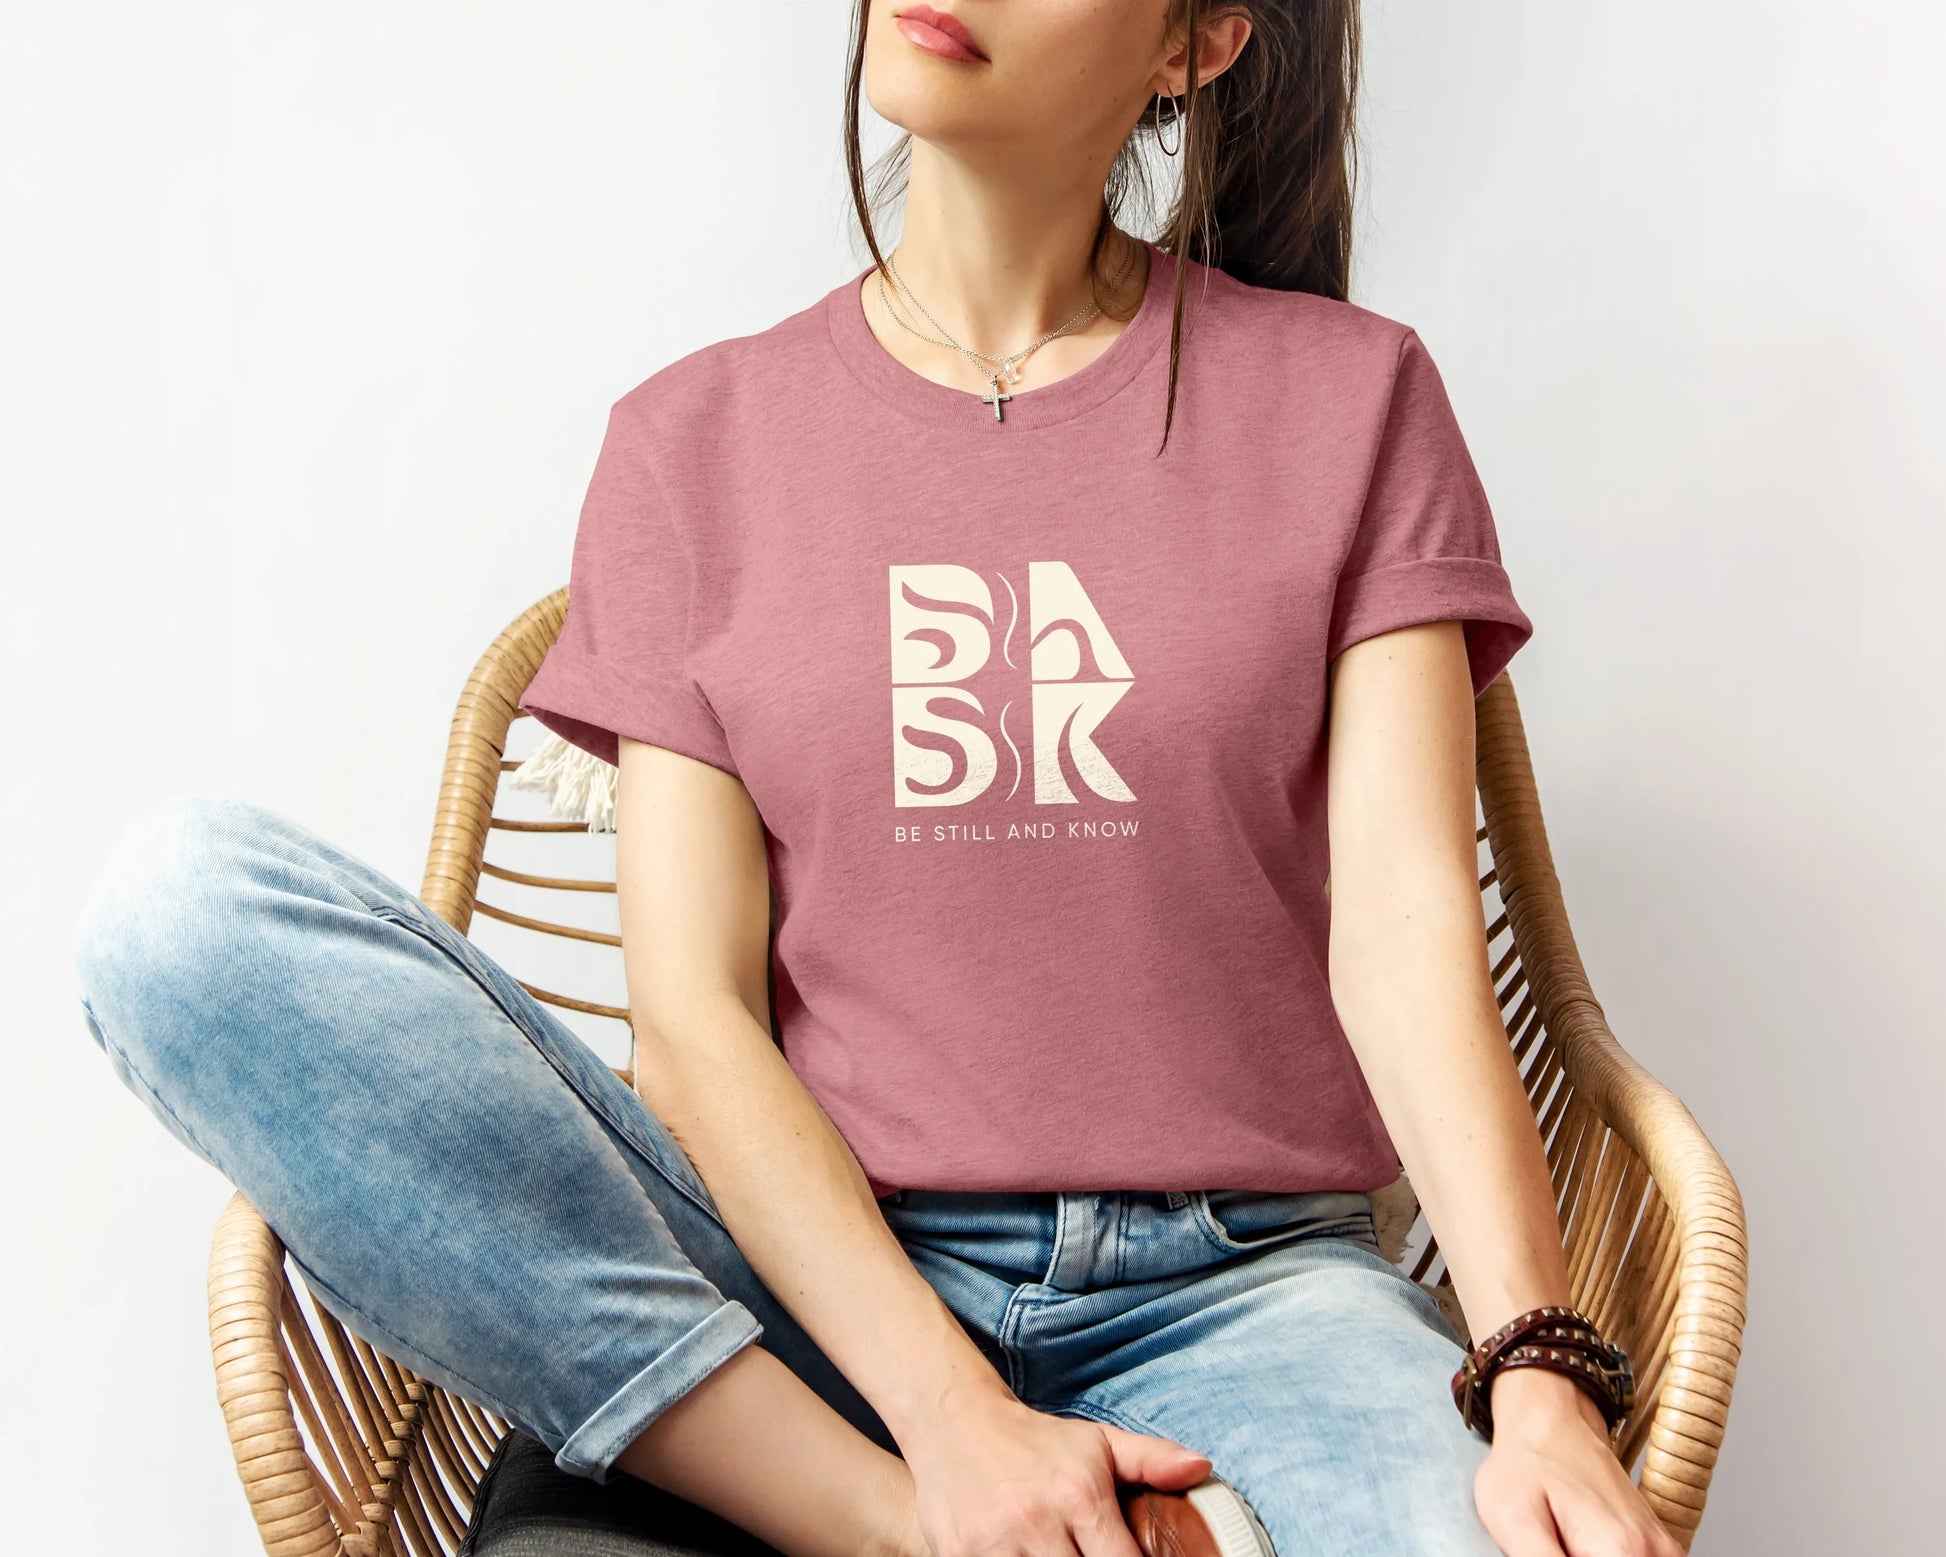 A woman wearing a Coastal Calm Tee In Heather Mauve by Be Still and Know logo sitting on a chair, showcasing Christian Apparel.